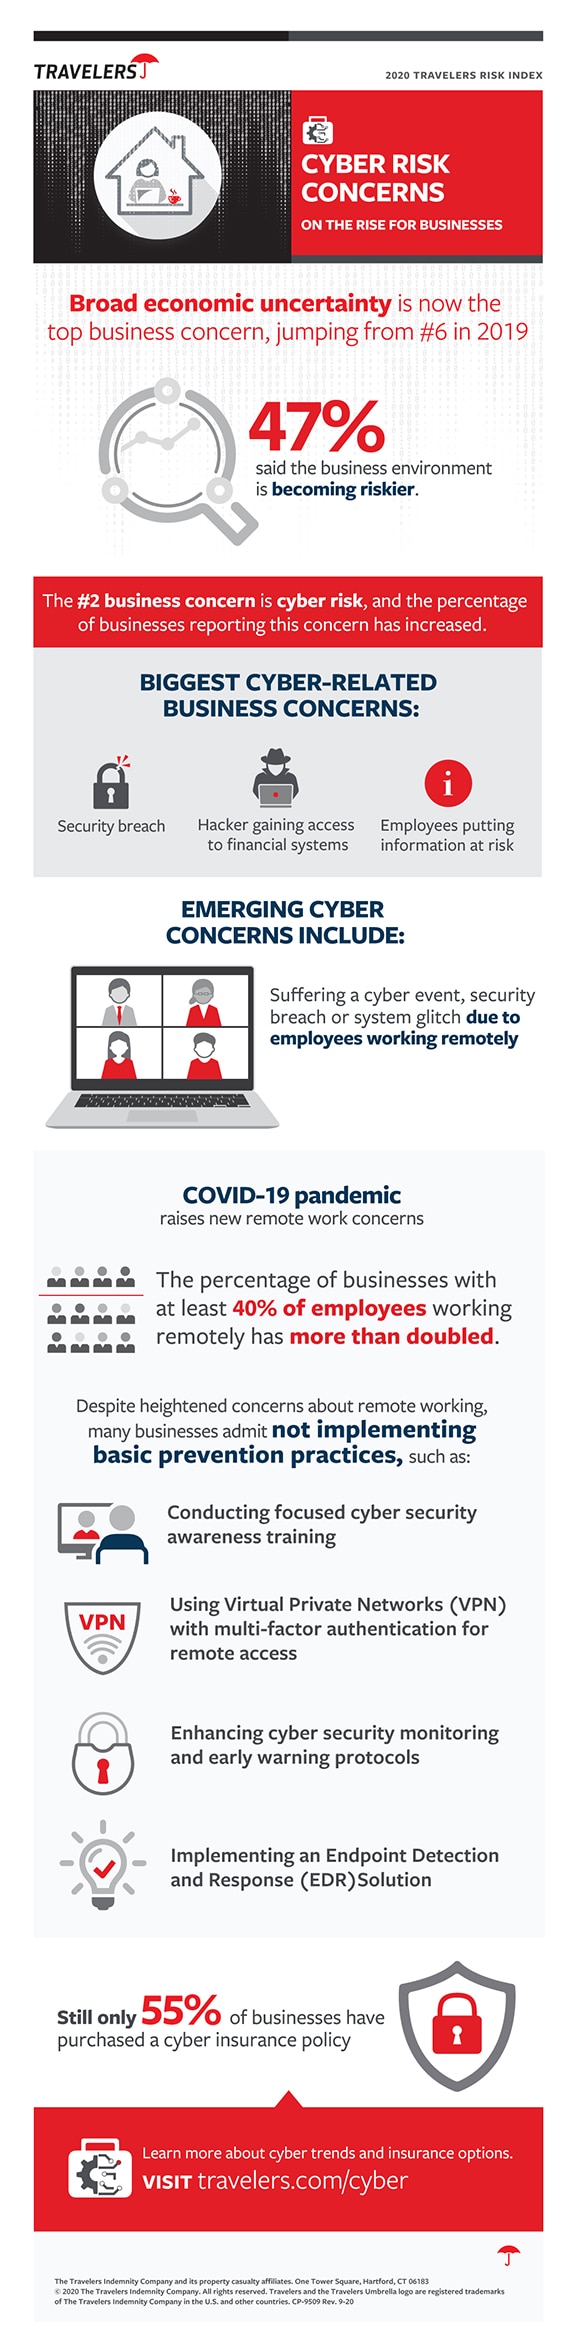 2020 Cyber Risk Infographic